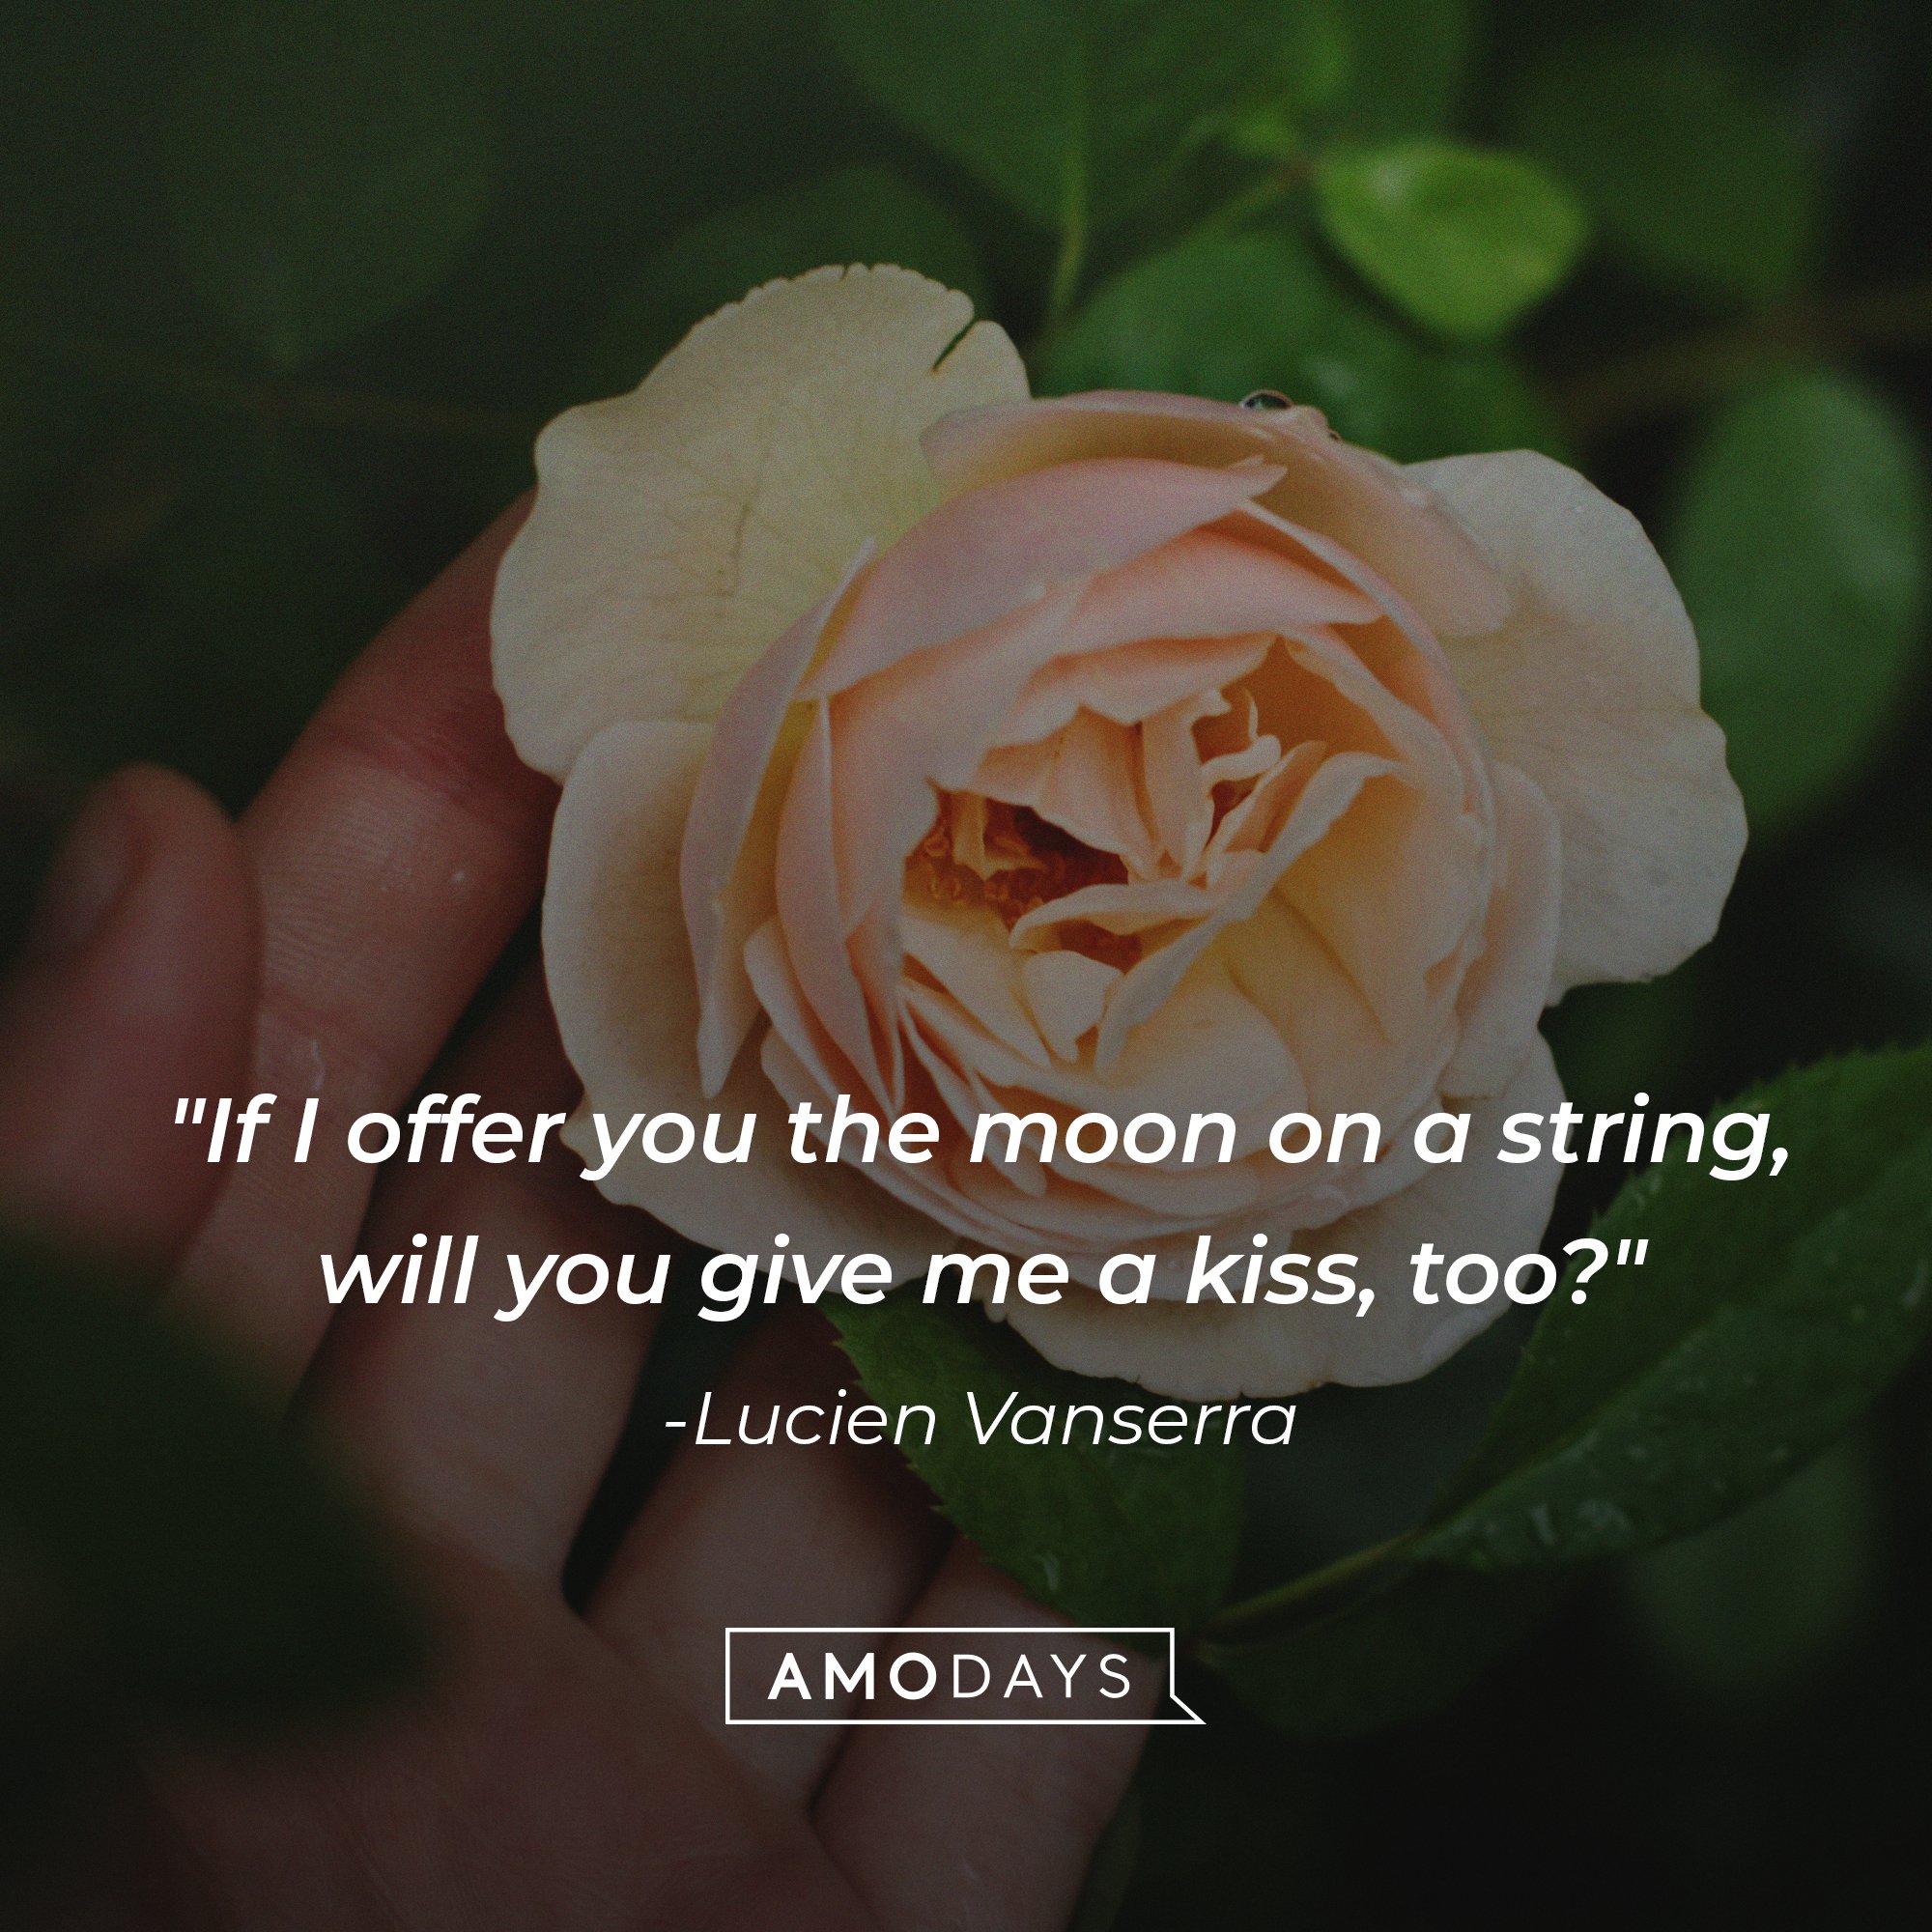 Lucien Vanserra’s quote: "If I offer you the moon on a string, will you give me a kiss, too?"  | Image: AmoDays